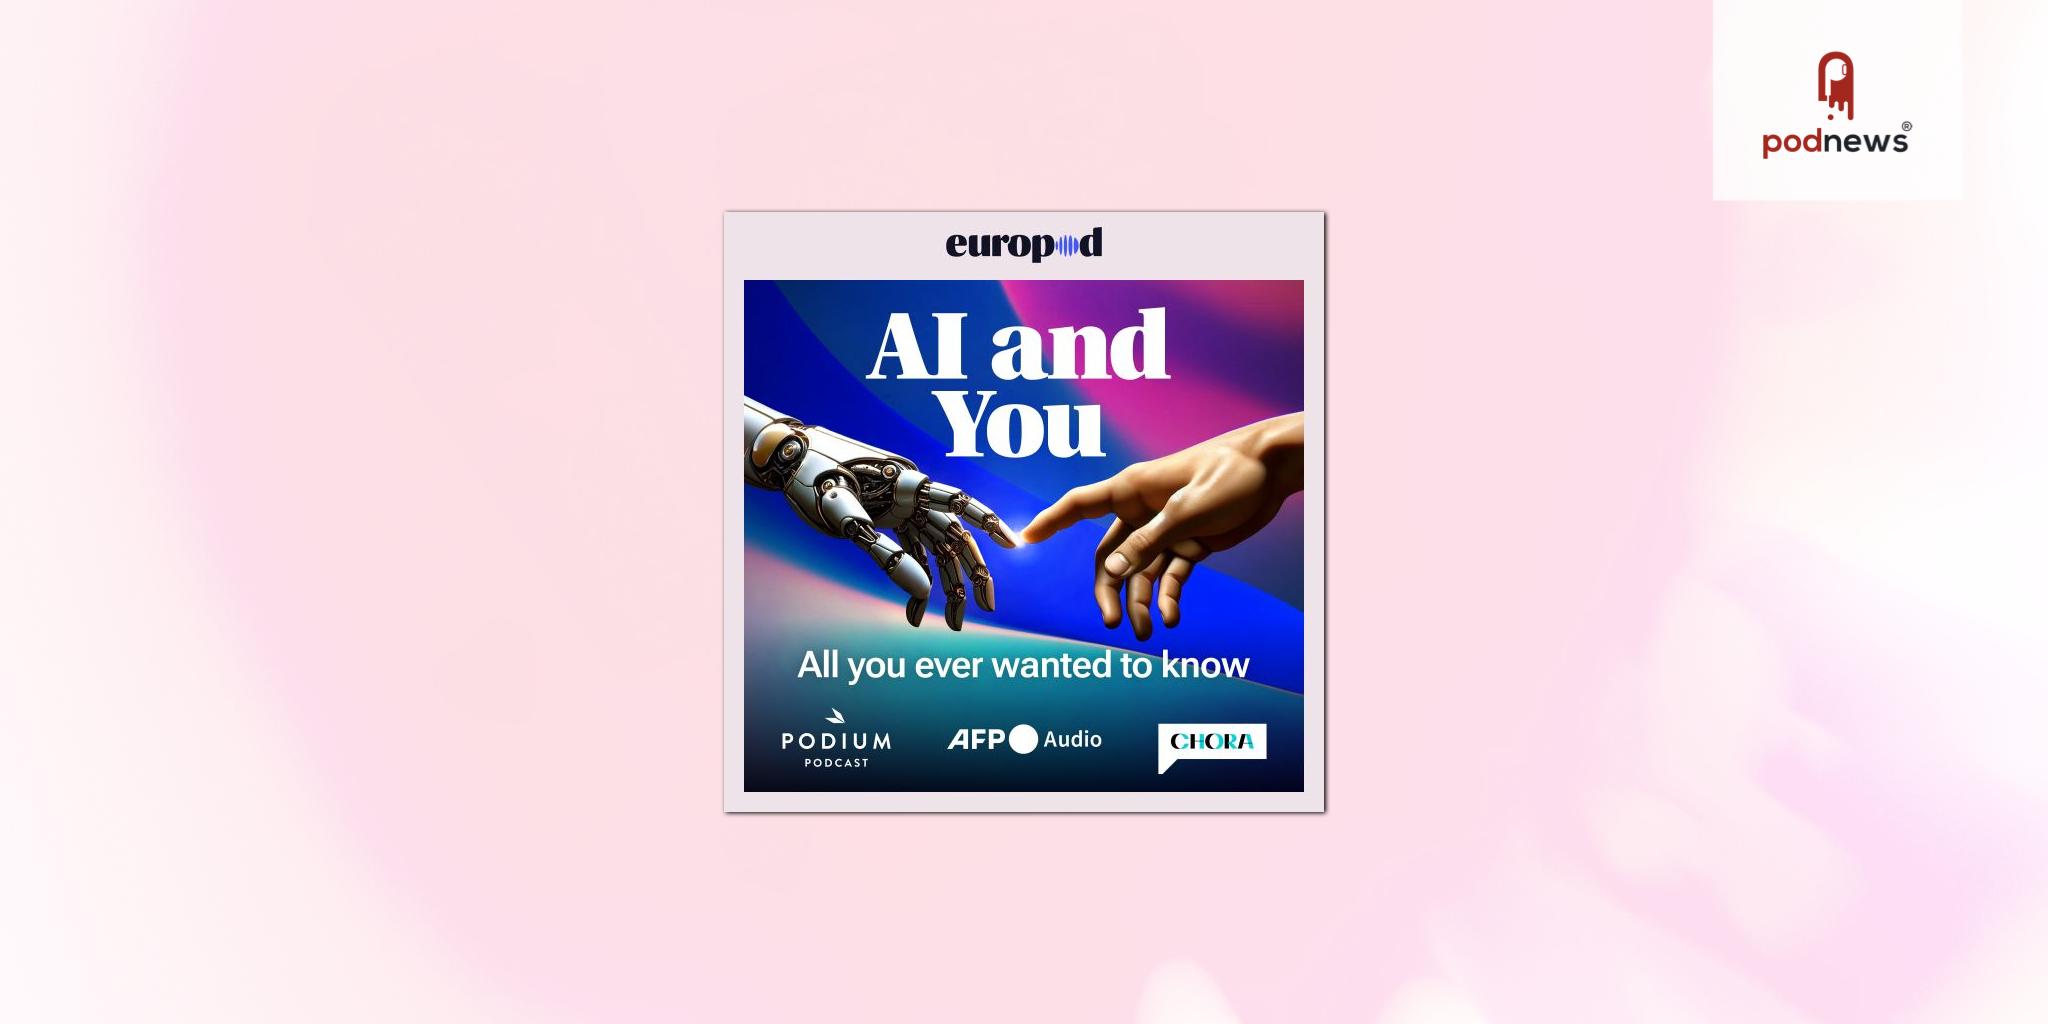 Europod Relaunches its European Podcast Network to Fight for Quality Information on the Internet